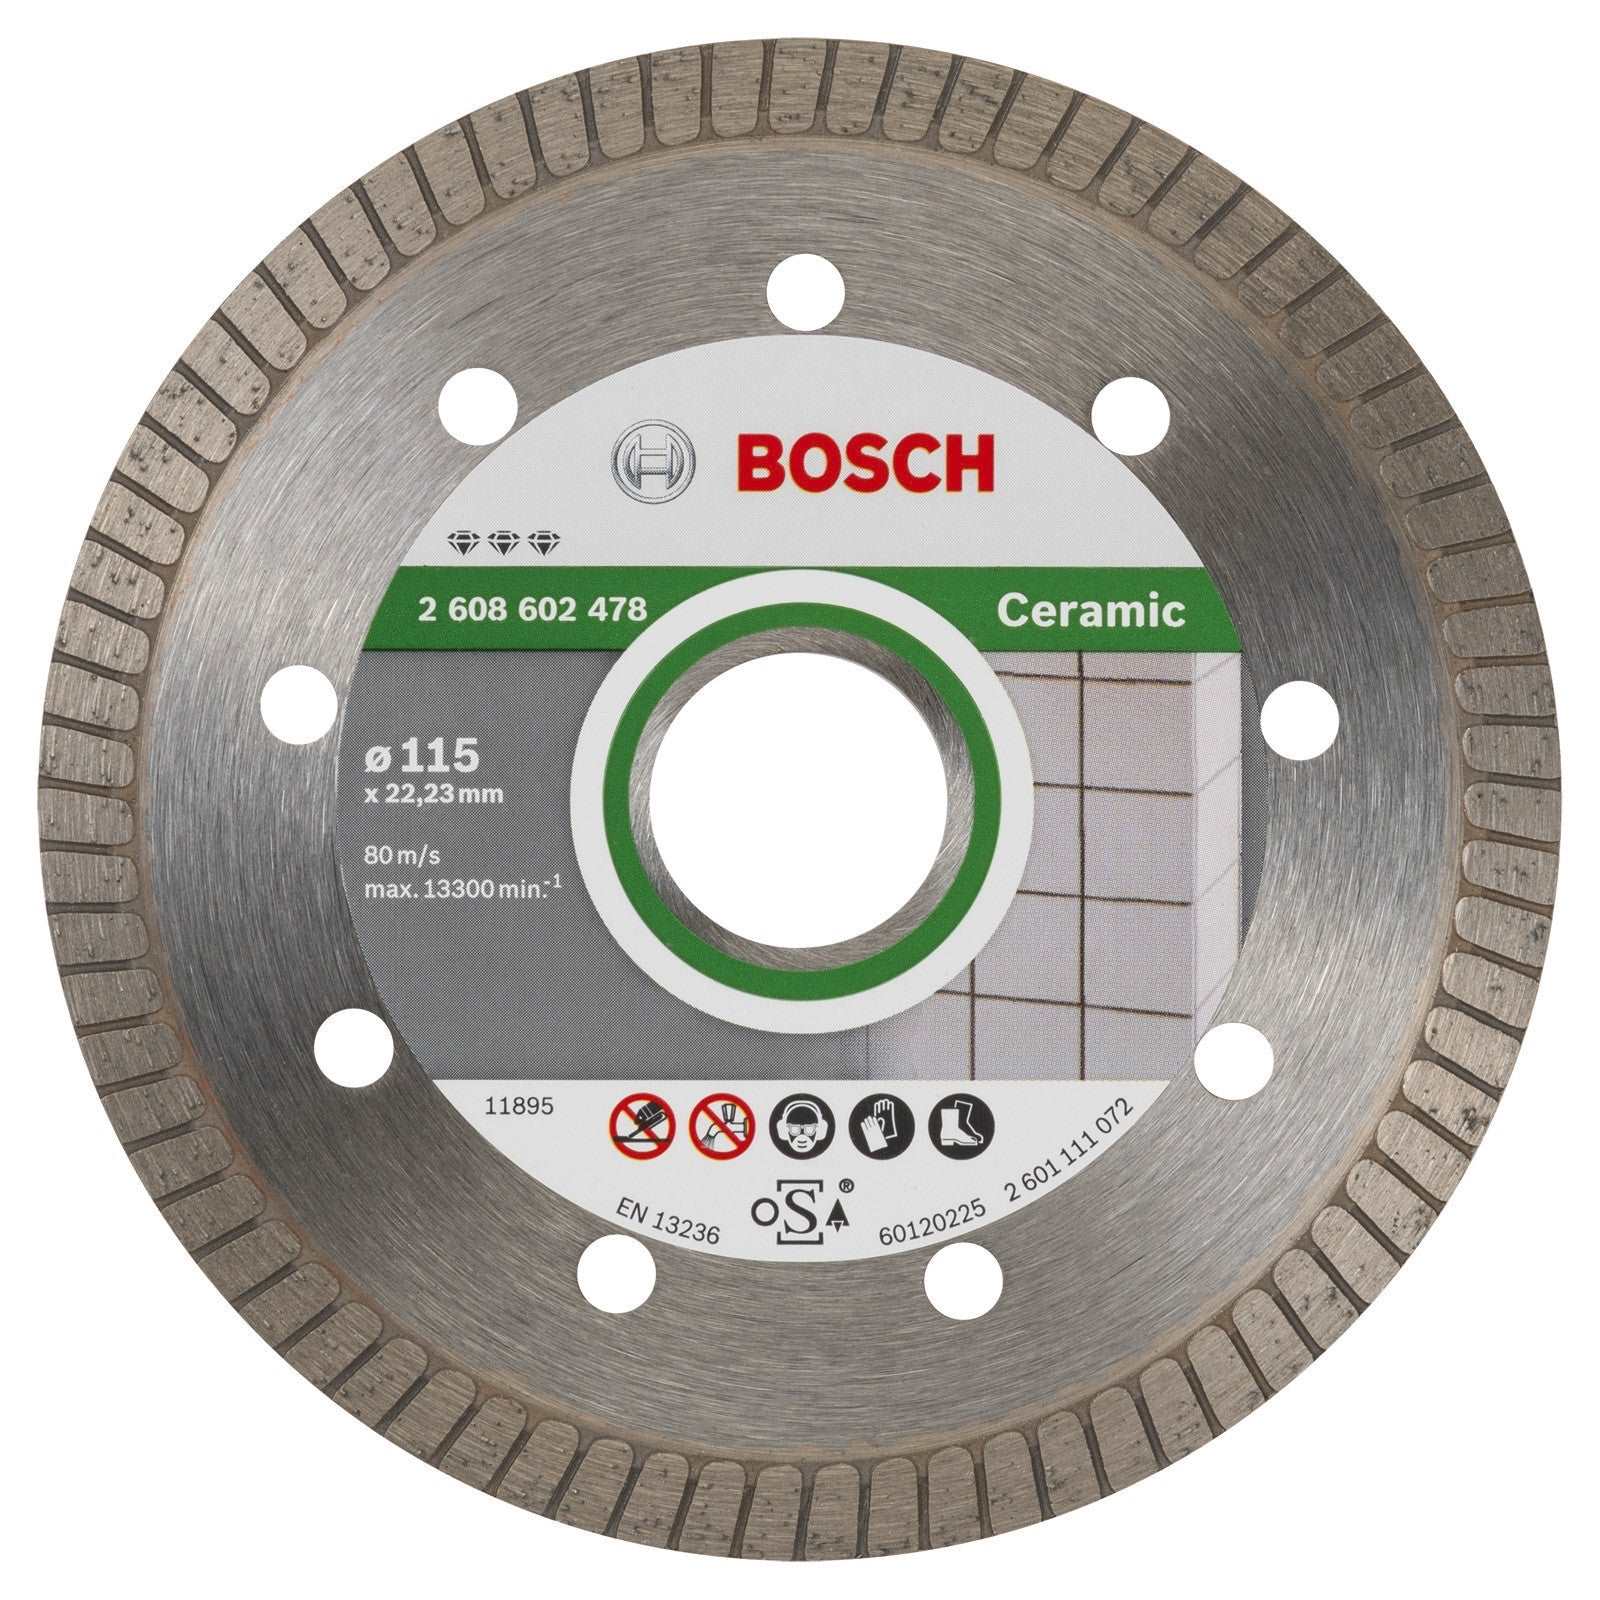 Bosch Best for Ceramic Extra Clean Turbo 115 x 22,23 x 1,4 x 7 continuous rim 2608602478 Power Tool Services